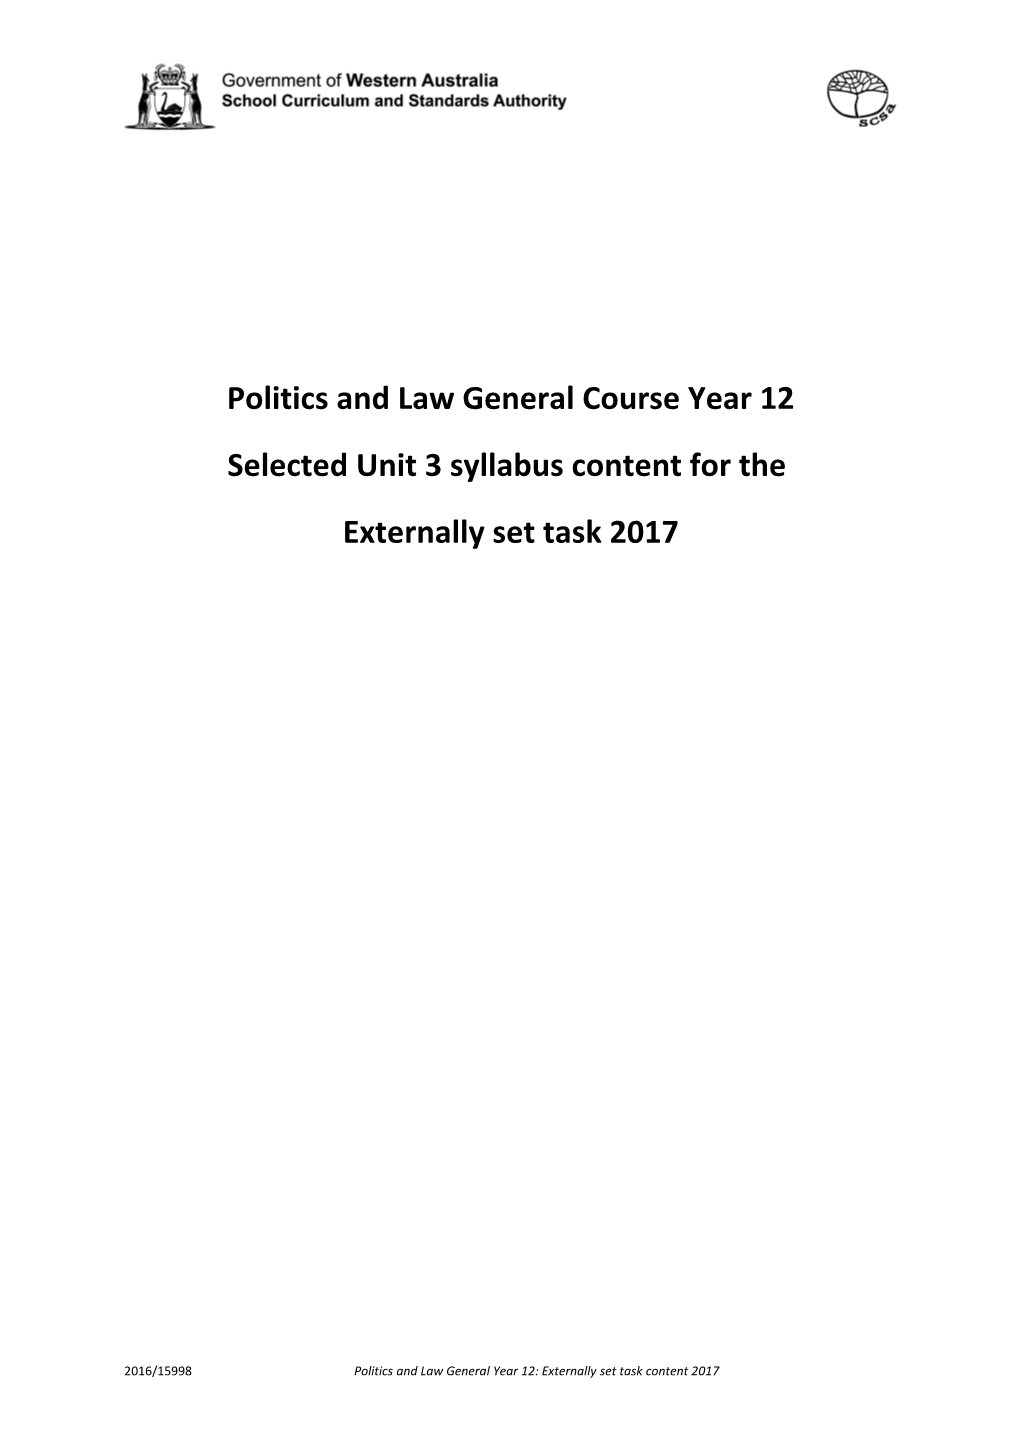 Politics and Law General Course Year 12